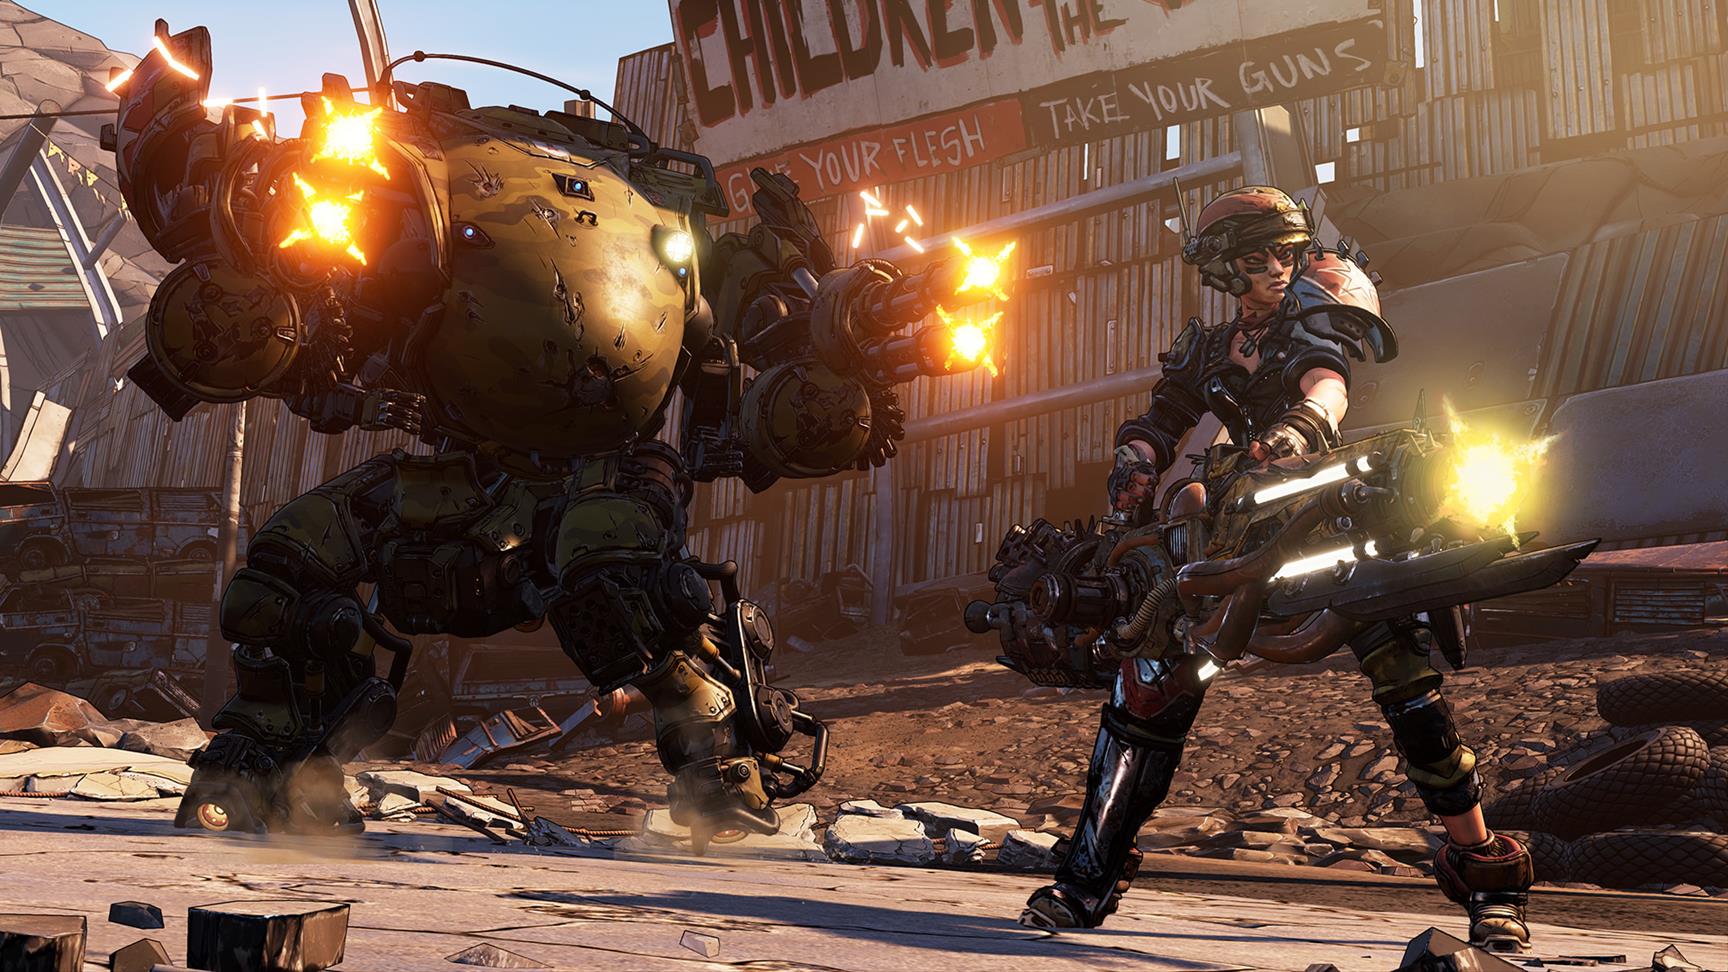 Image for Here's 10 minutes of mech-tastic Borderlands 3 gameplay